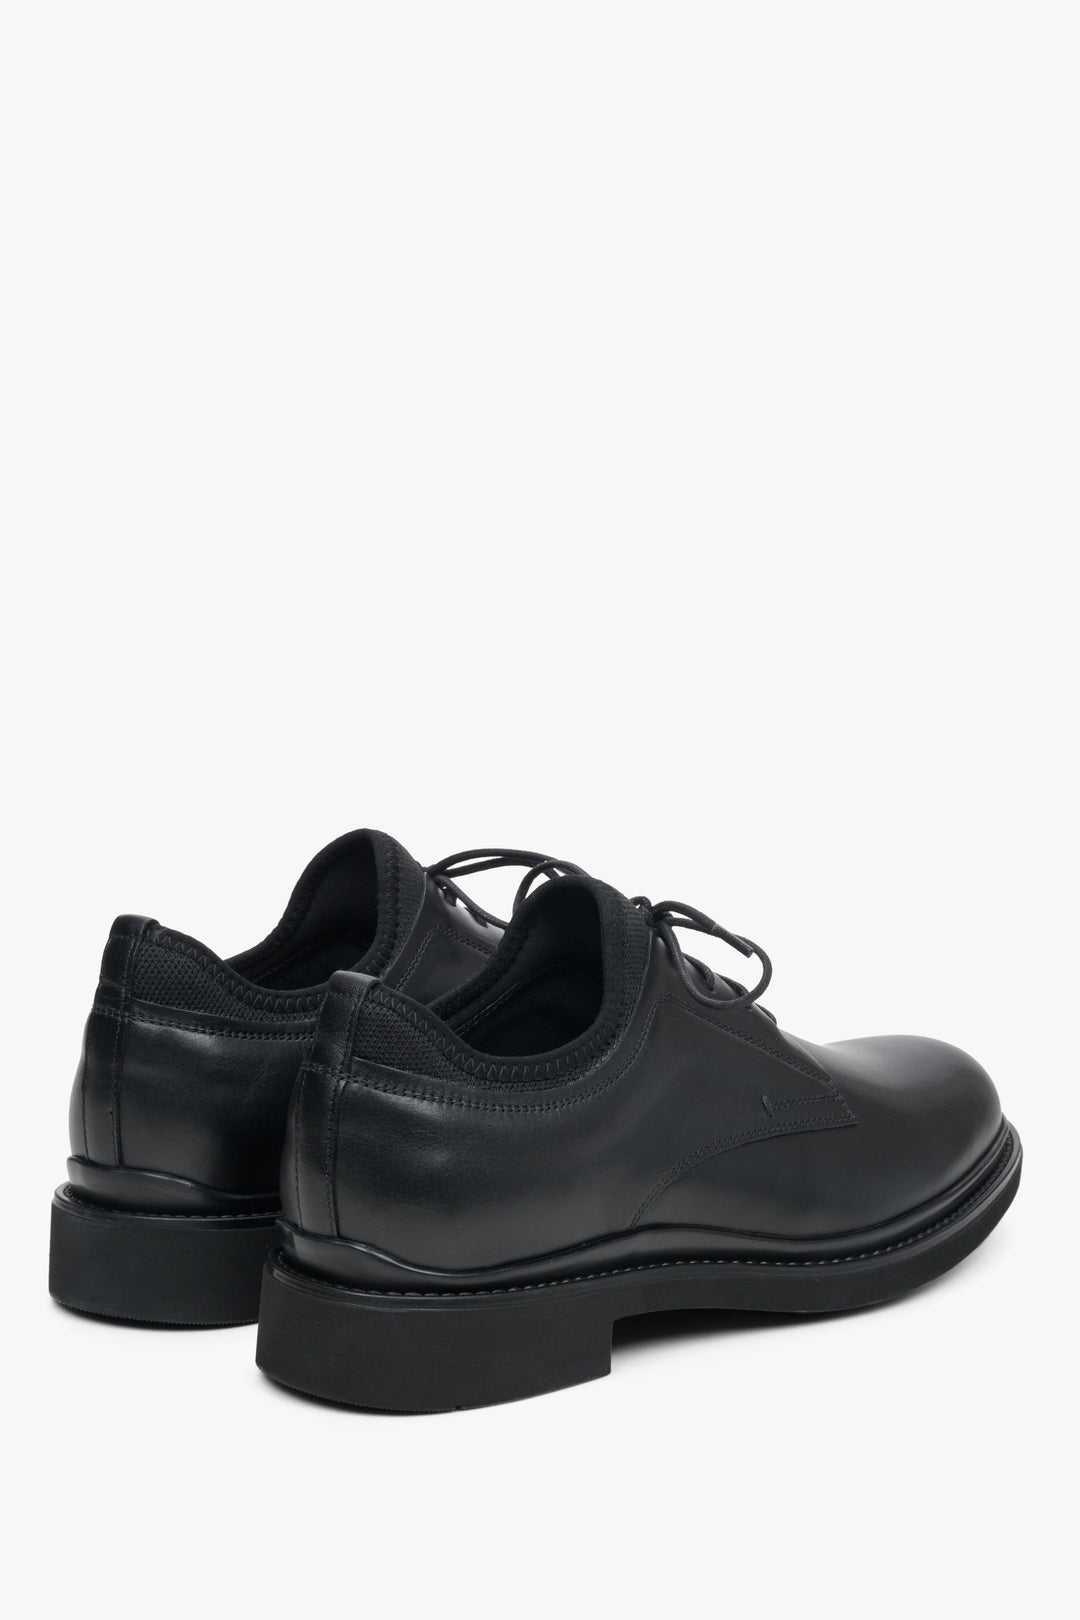 Men's leather black lace-up shoes by Estro - close-up on the heel and side stripe.